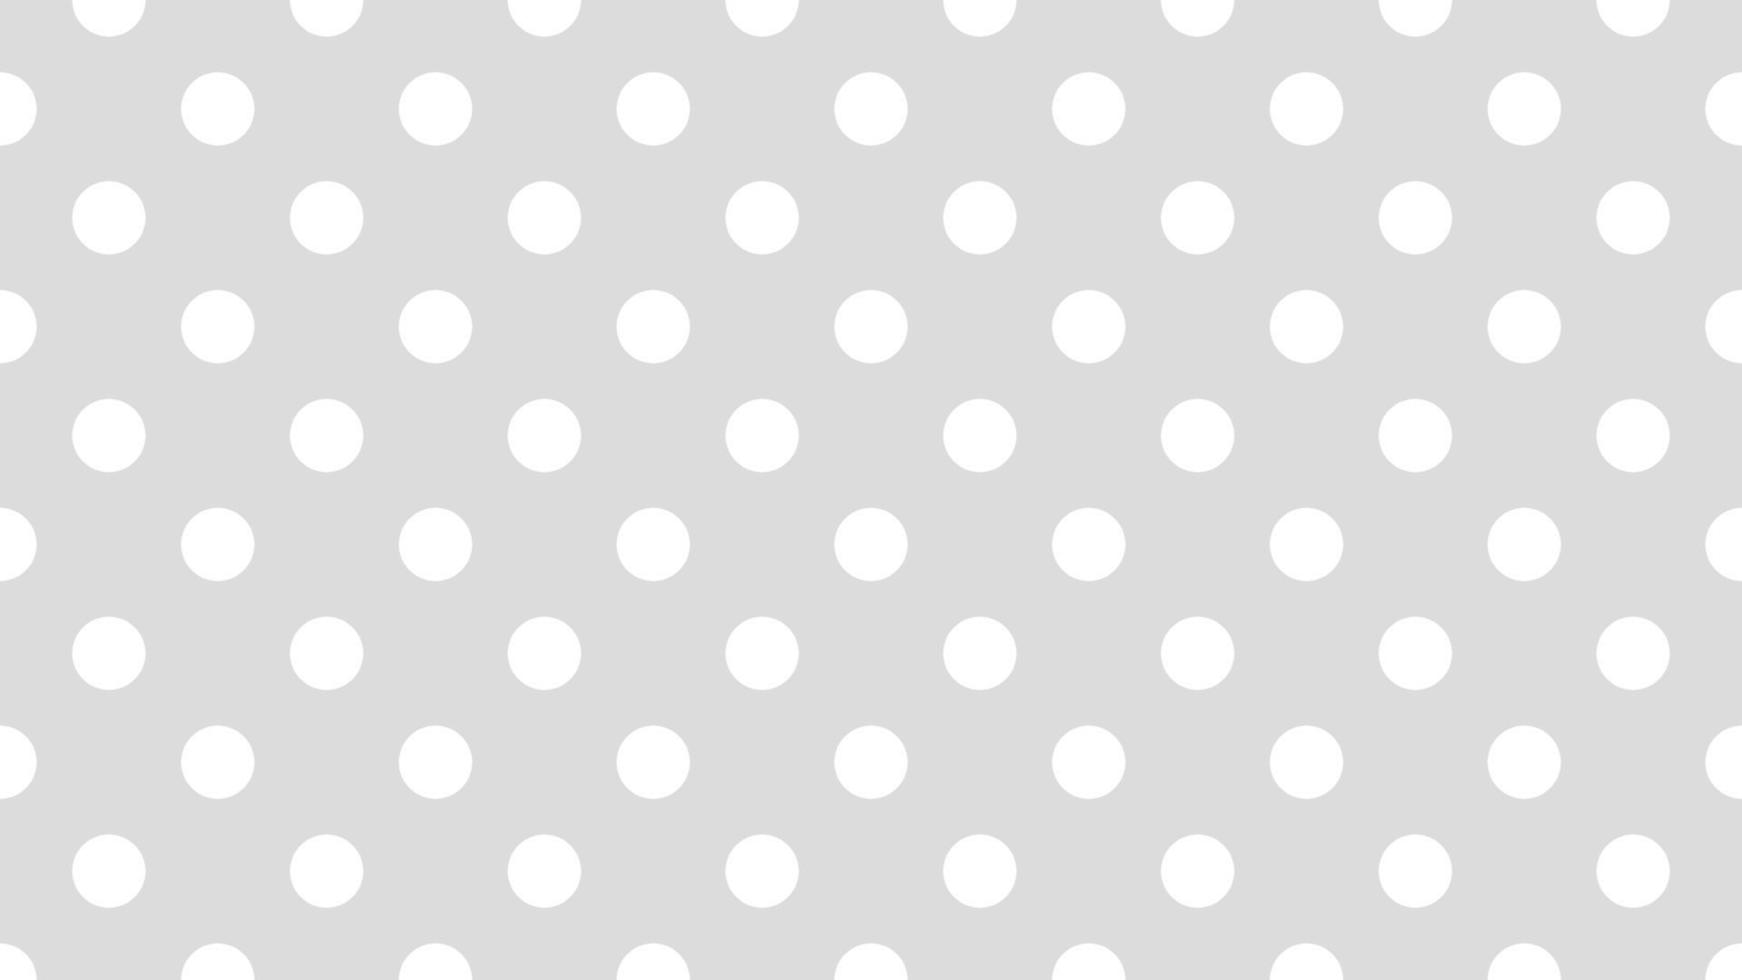 white color polka dots over gainsboro grey background vector